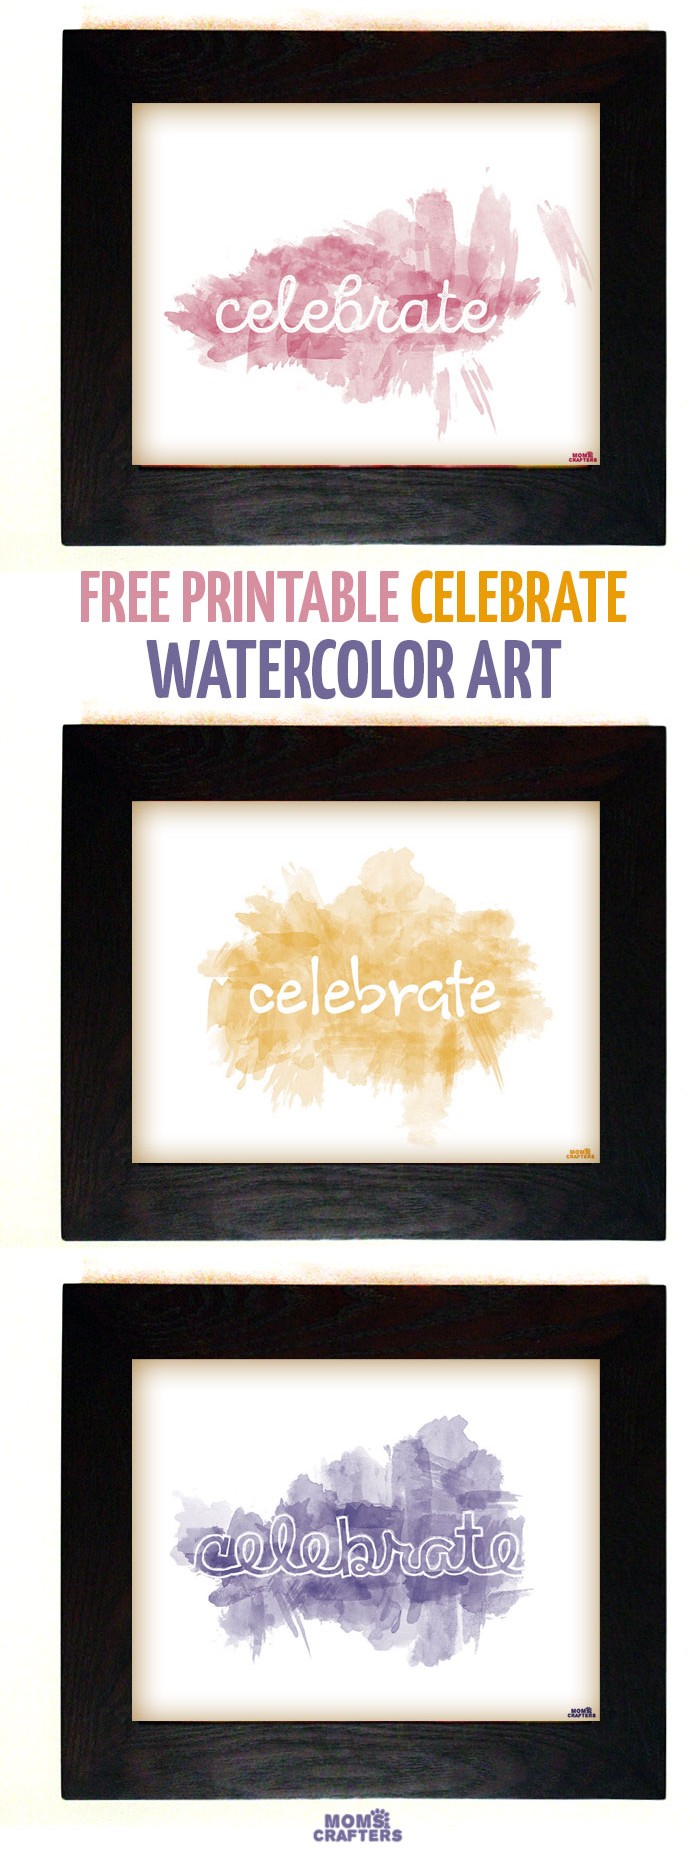 Great for New Year's parties, birthday parties, or any special occasions, these free printable CELEBRATE watercolor art are perfect! Print them for free to hang as wall art, or to use in a temporary gallery wall.